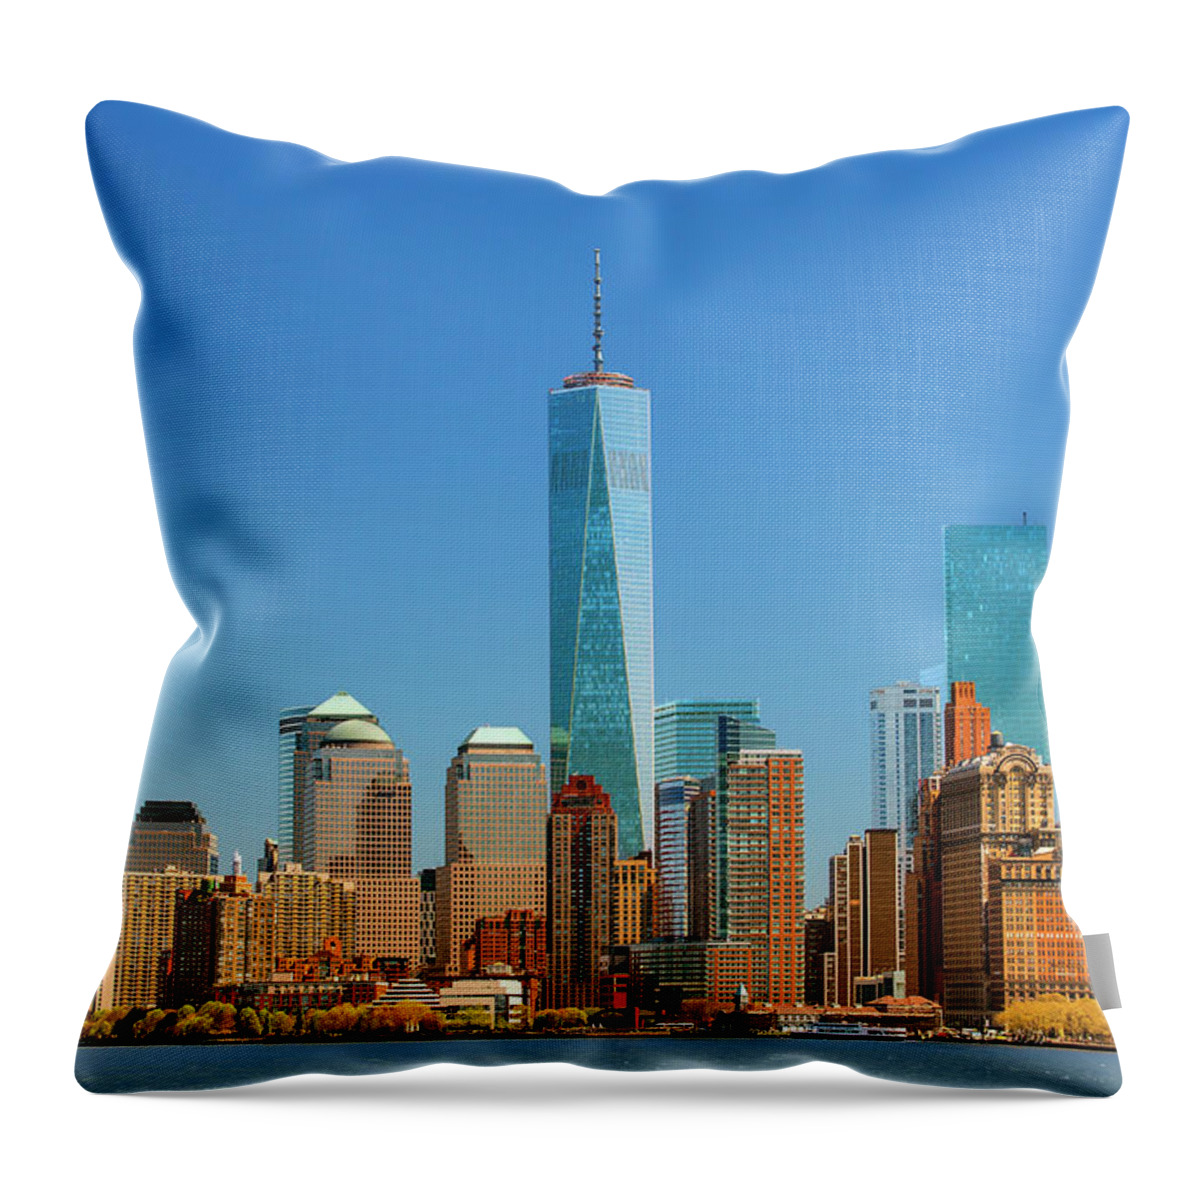 Lower Manhattan Throw Pillow featuring the photograph Skyline Of New York With One World #2 by Sylvain Sonnet